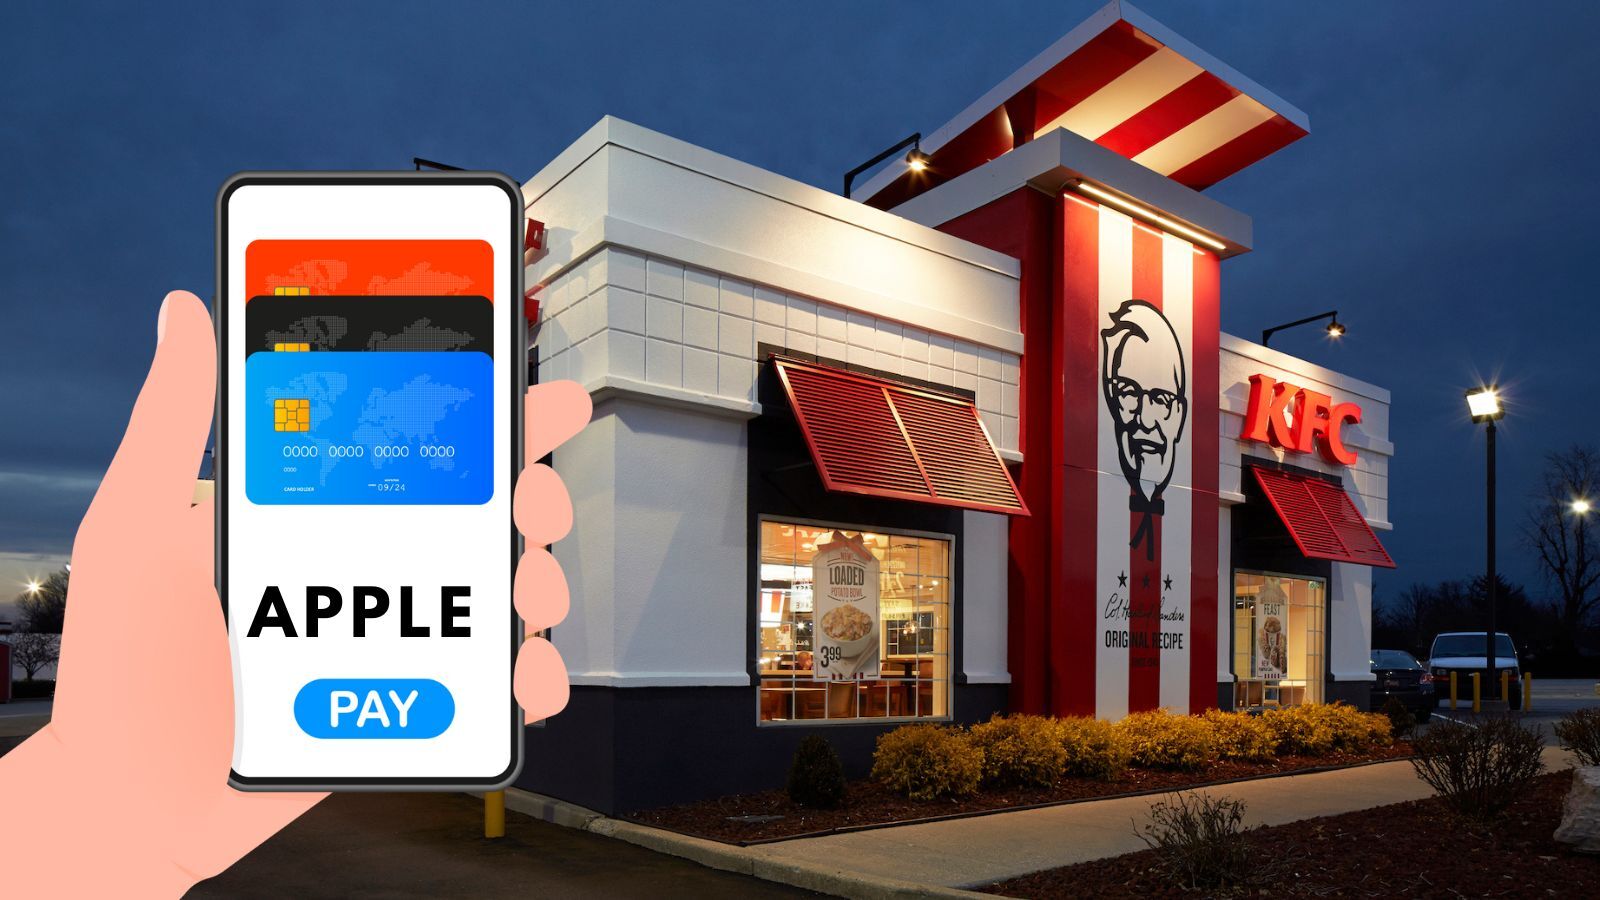 Does KFC Take Apple Pay? (All You Need to Know)